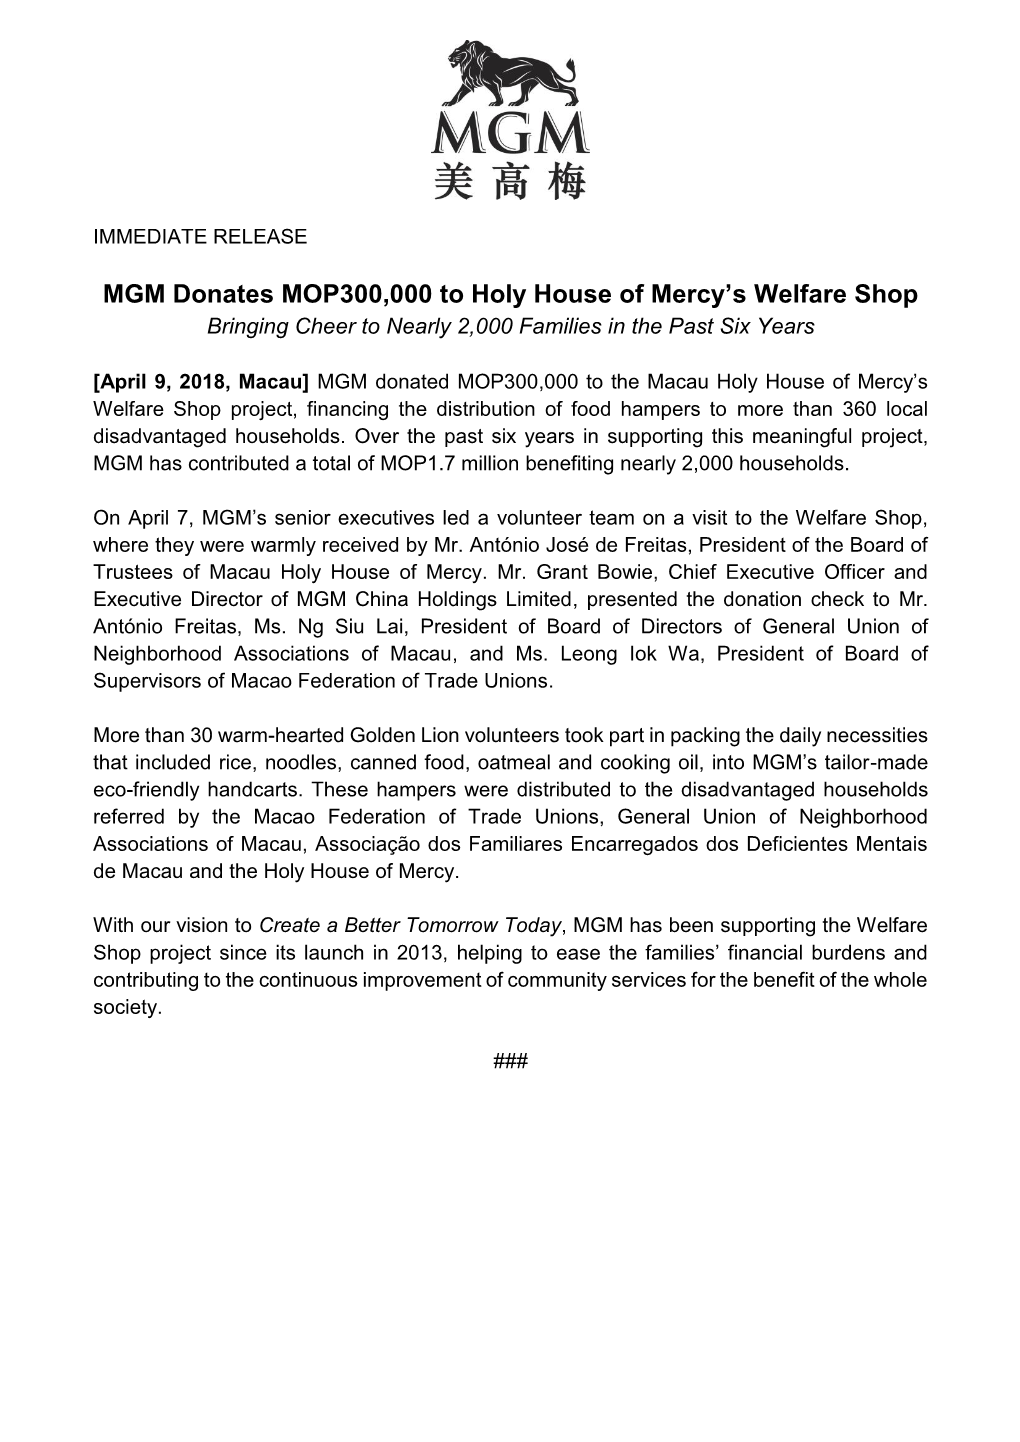 MGM Donates MOP300,000 to Holy House of Mercy’S Welfare Shop Bringing Cheer to Nearly 2,000 Families in the Past Six Years